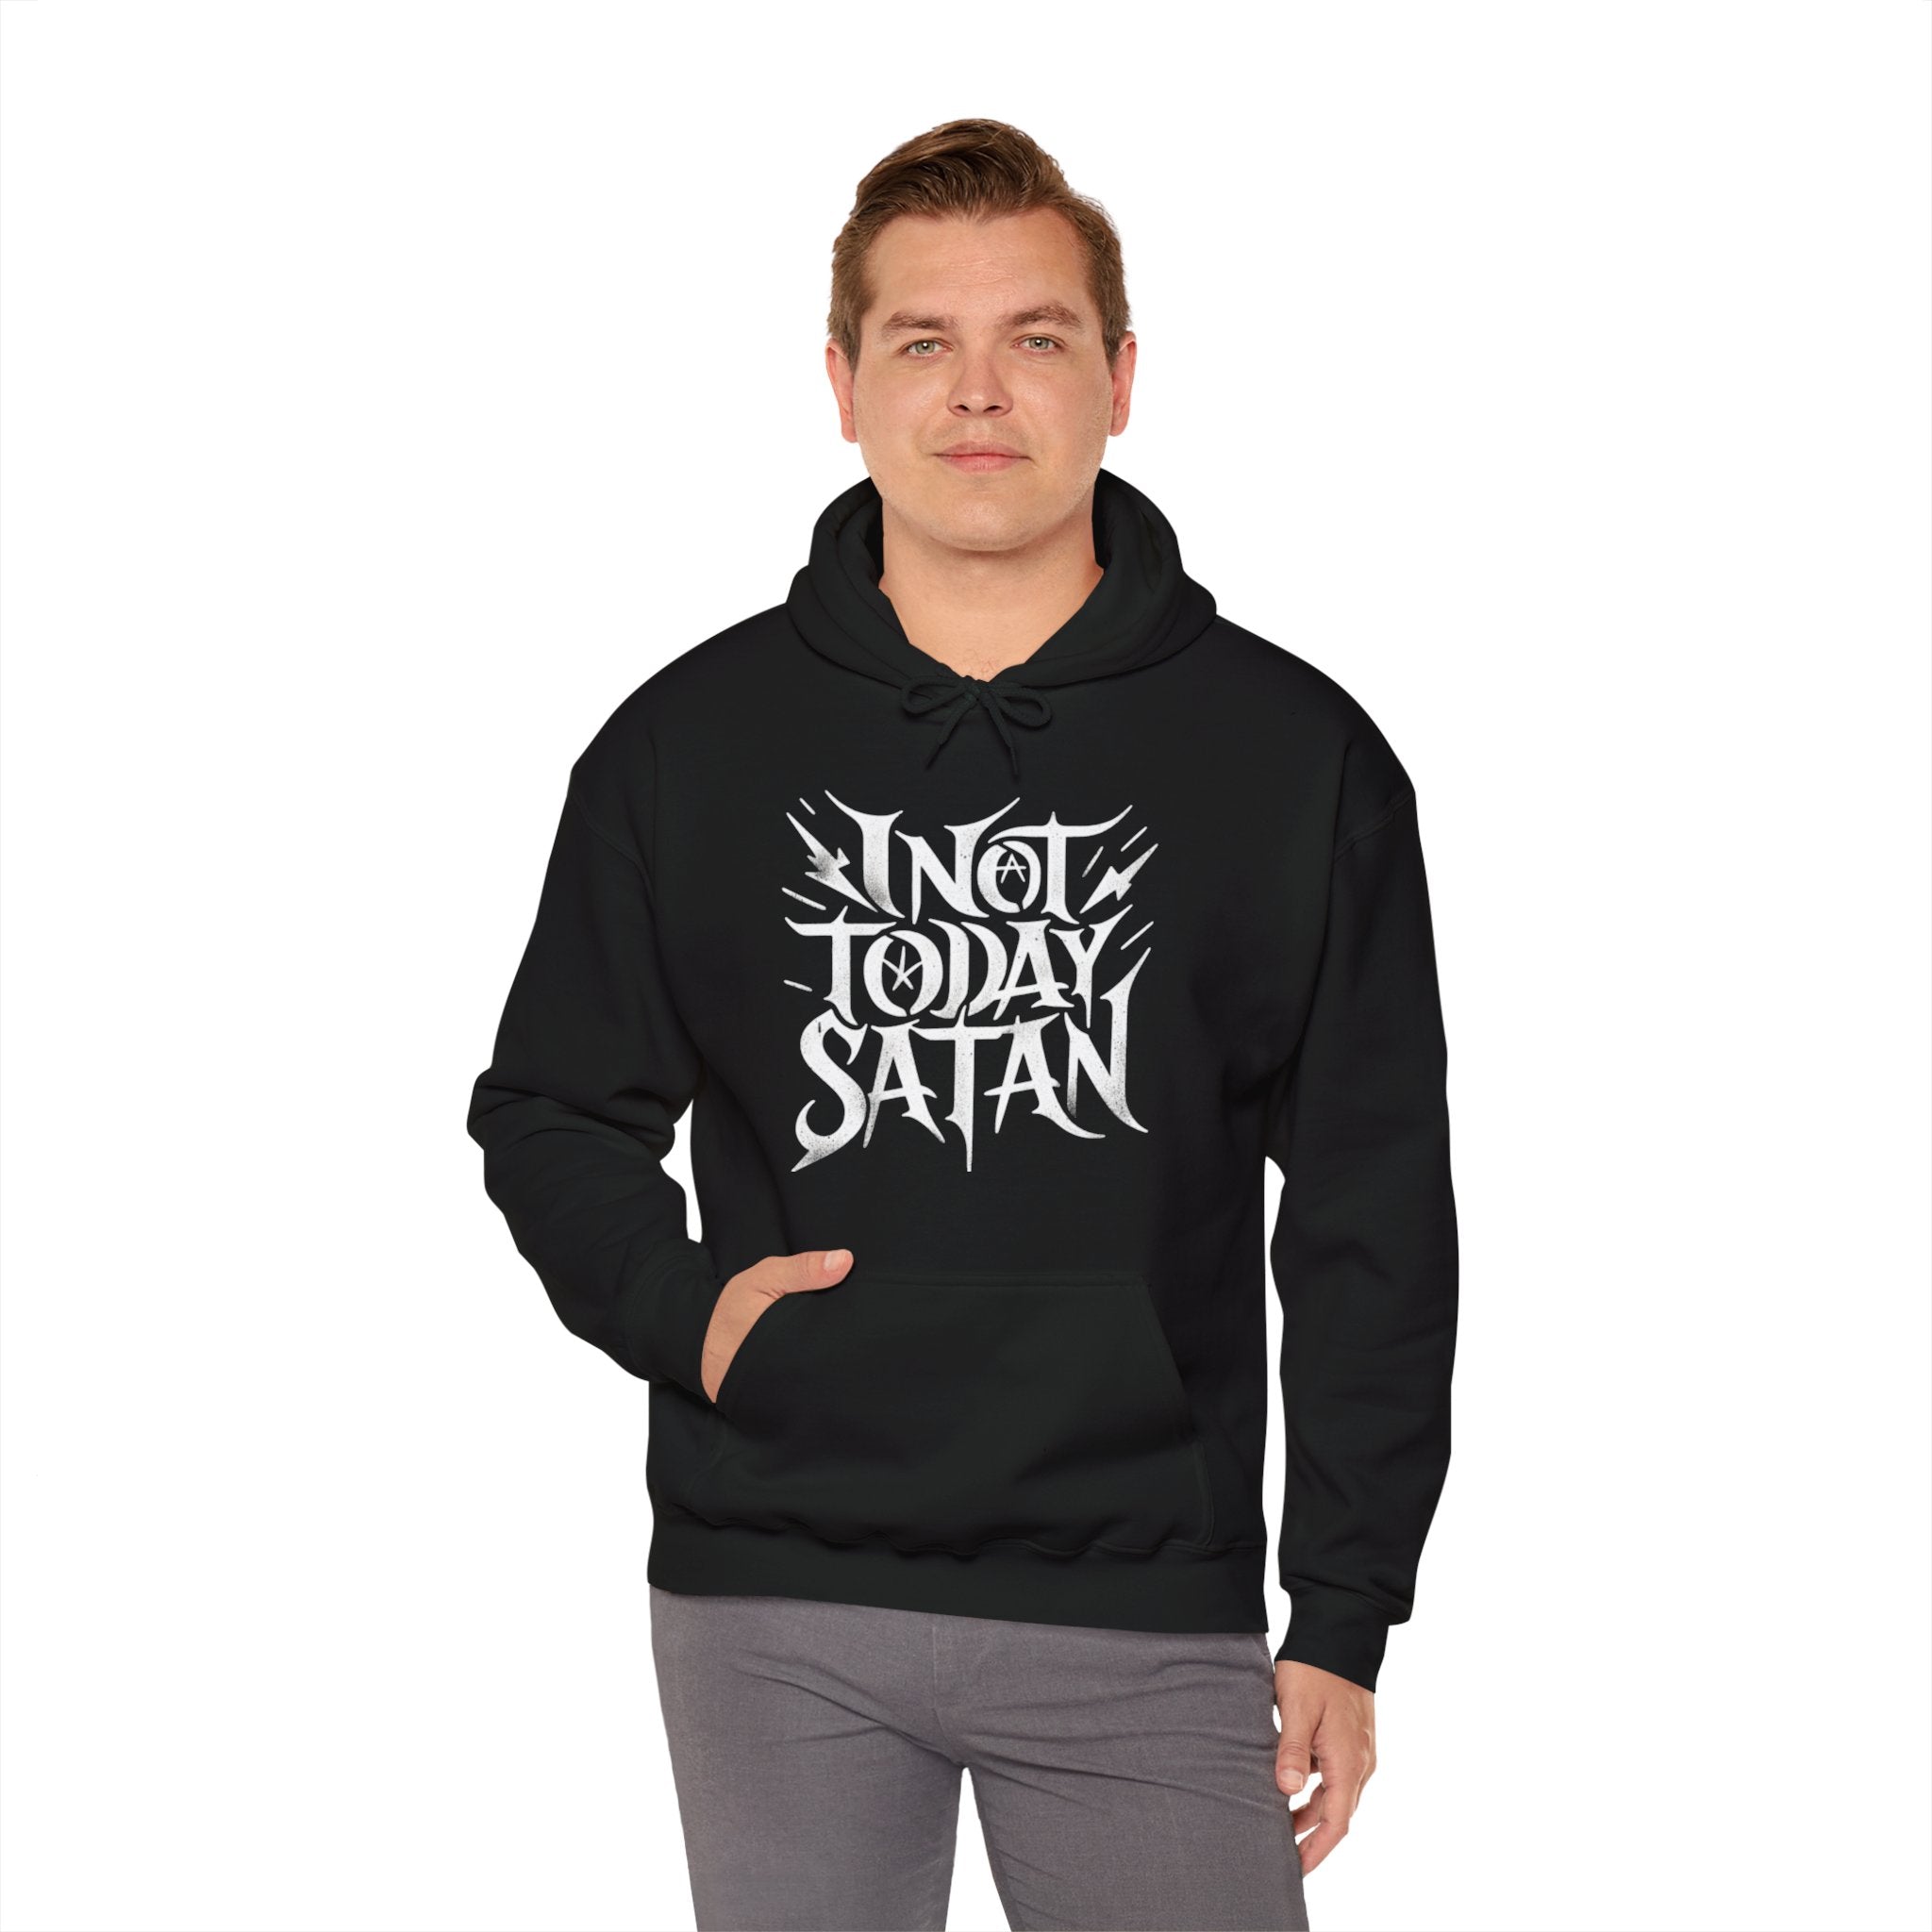 A man sporting a bold casual look of the **Not Today Satan - Hooded Sweatshirt**, proudly displaying the text "Not Today Satan" on the front.